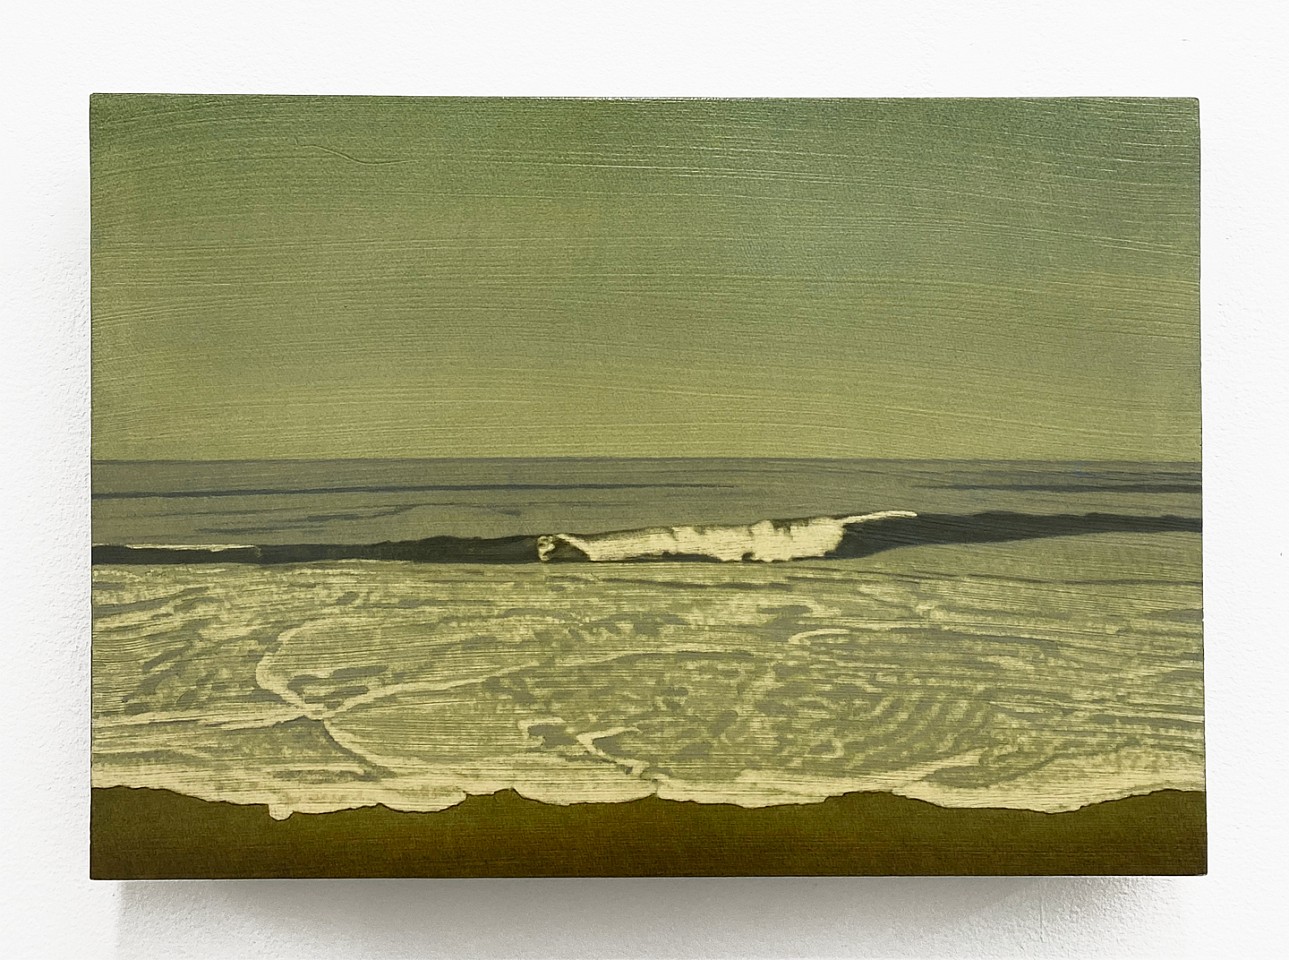 Clay Wagstaff
Ocean no. 43, 2012
WAG280
oil on panel, 13 x 19 inches